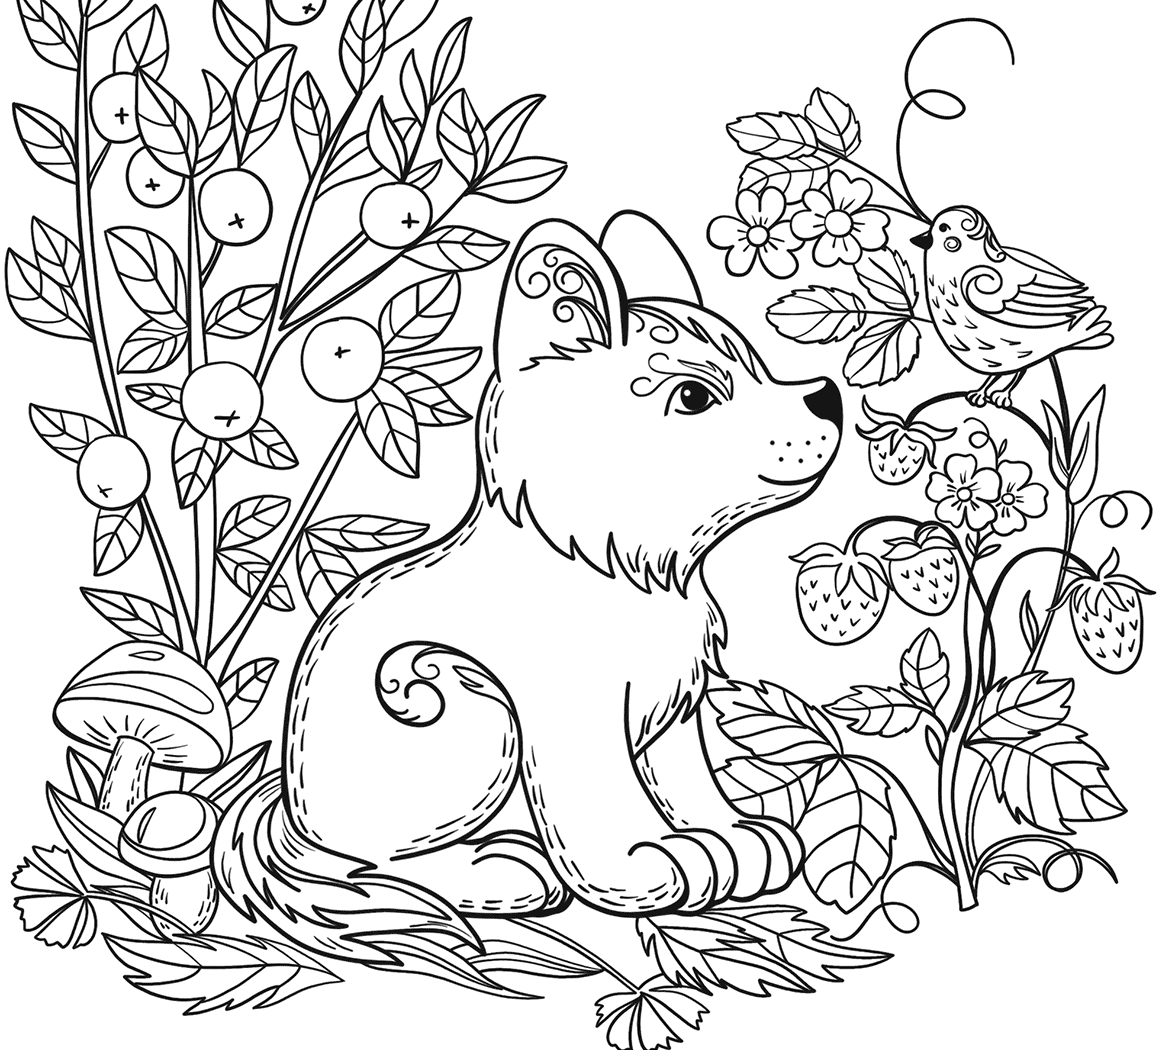 Free Wild Animal Coloring Pages at GetColorings.com | Free printable